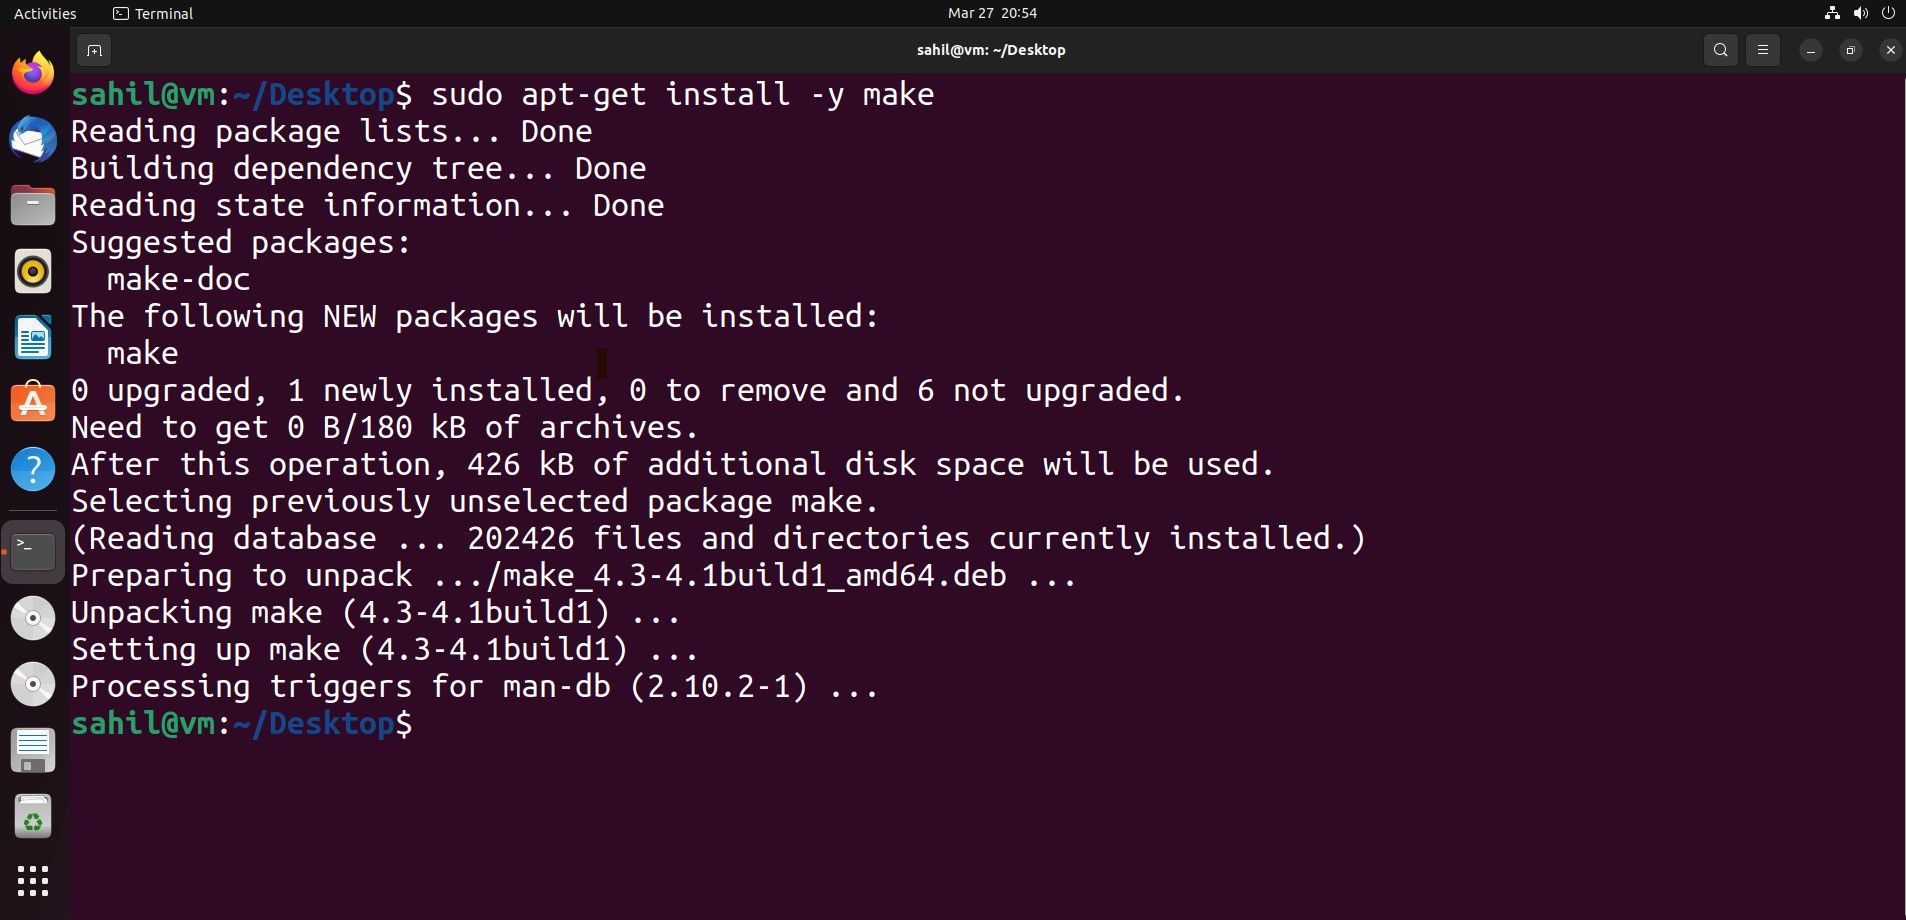 Linux Ubuntu terminal interface with installation commands